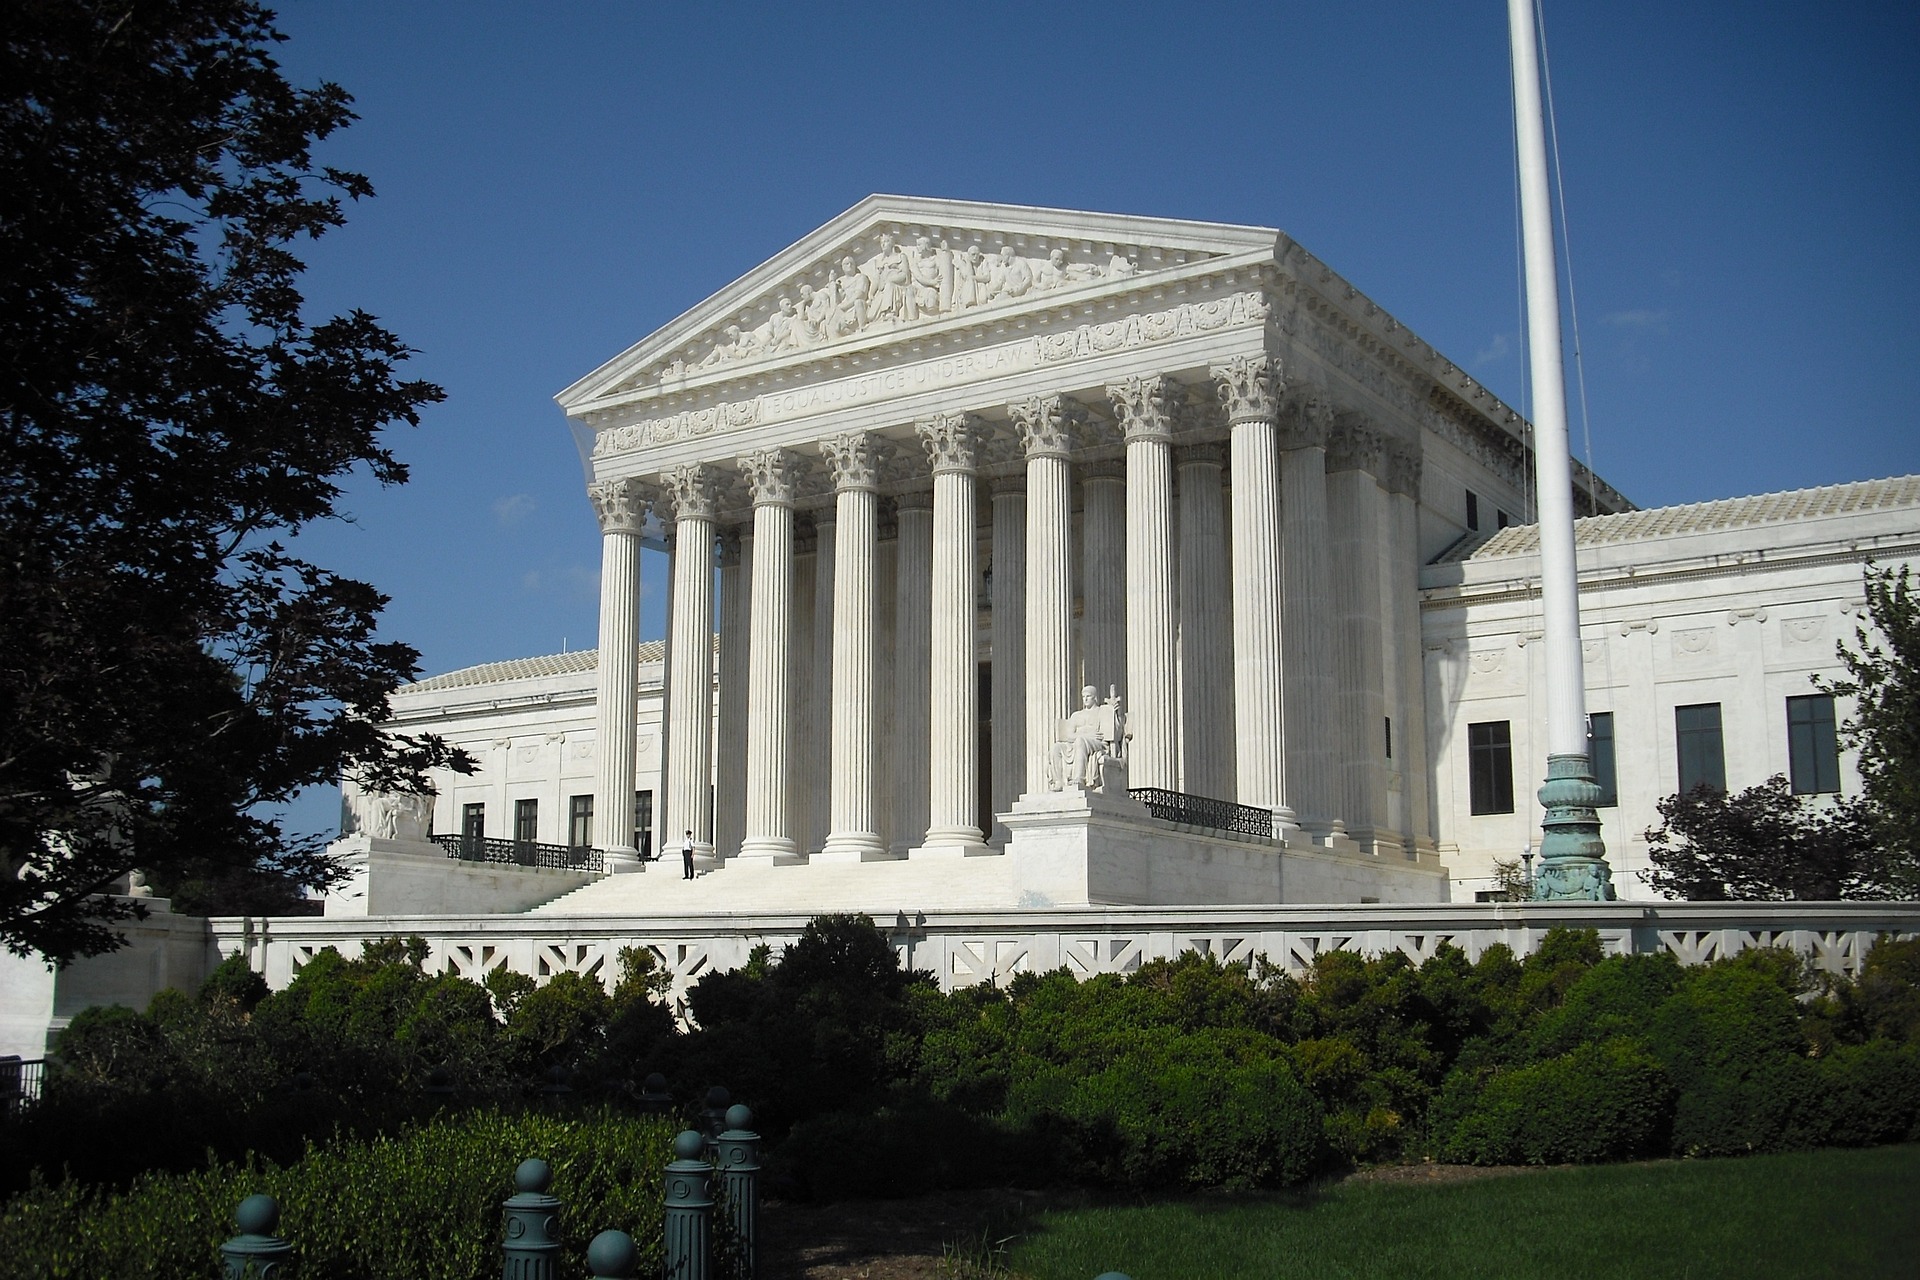 Exterior photo of the United States Supreme Court